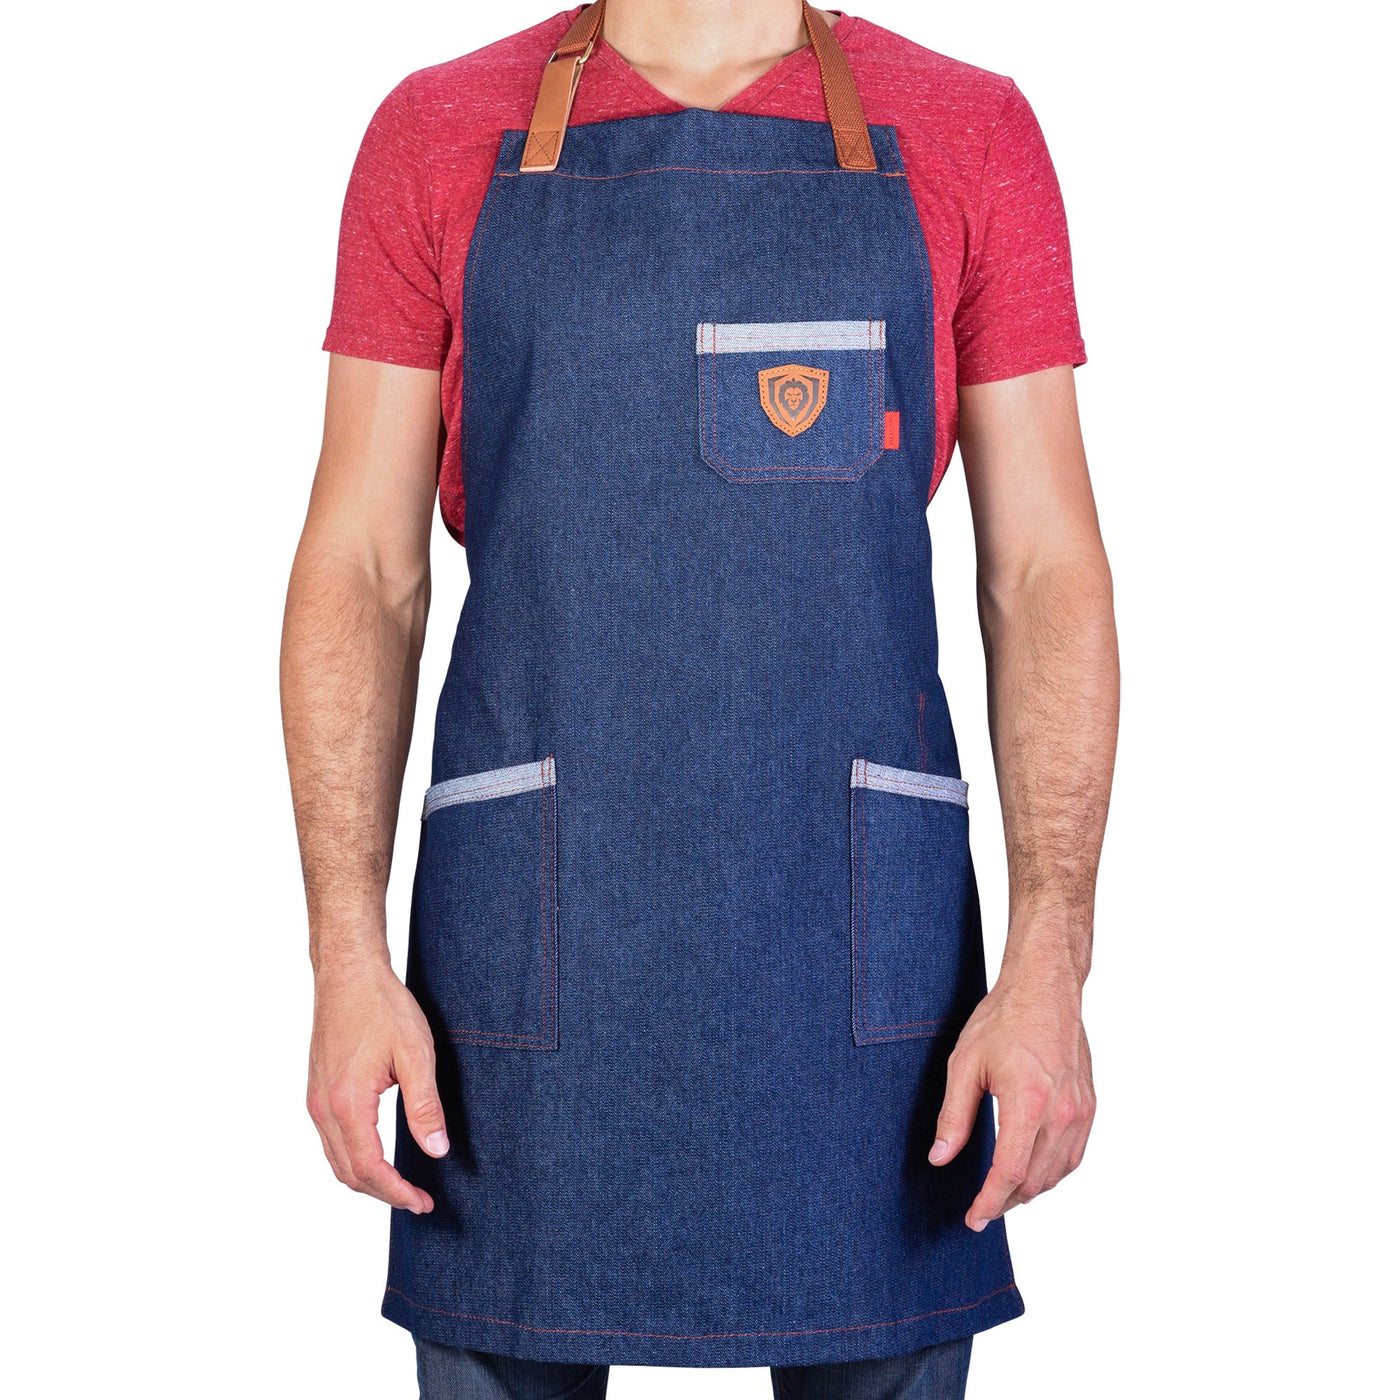 American Legend | Professional Chef's Kitchen Apron | Dalstrong ©